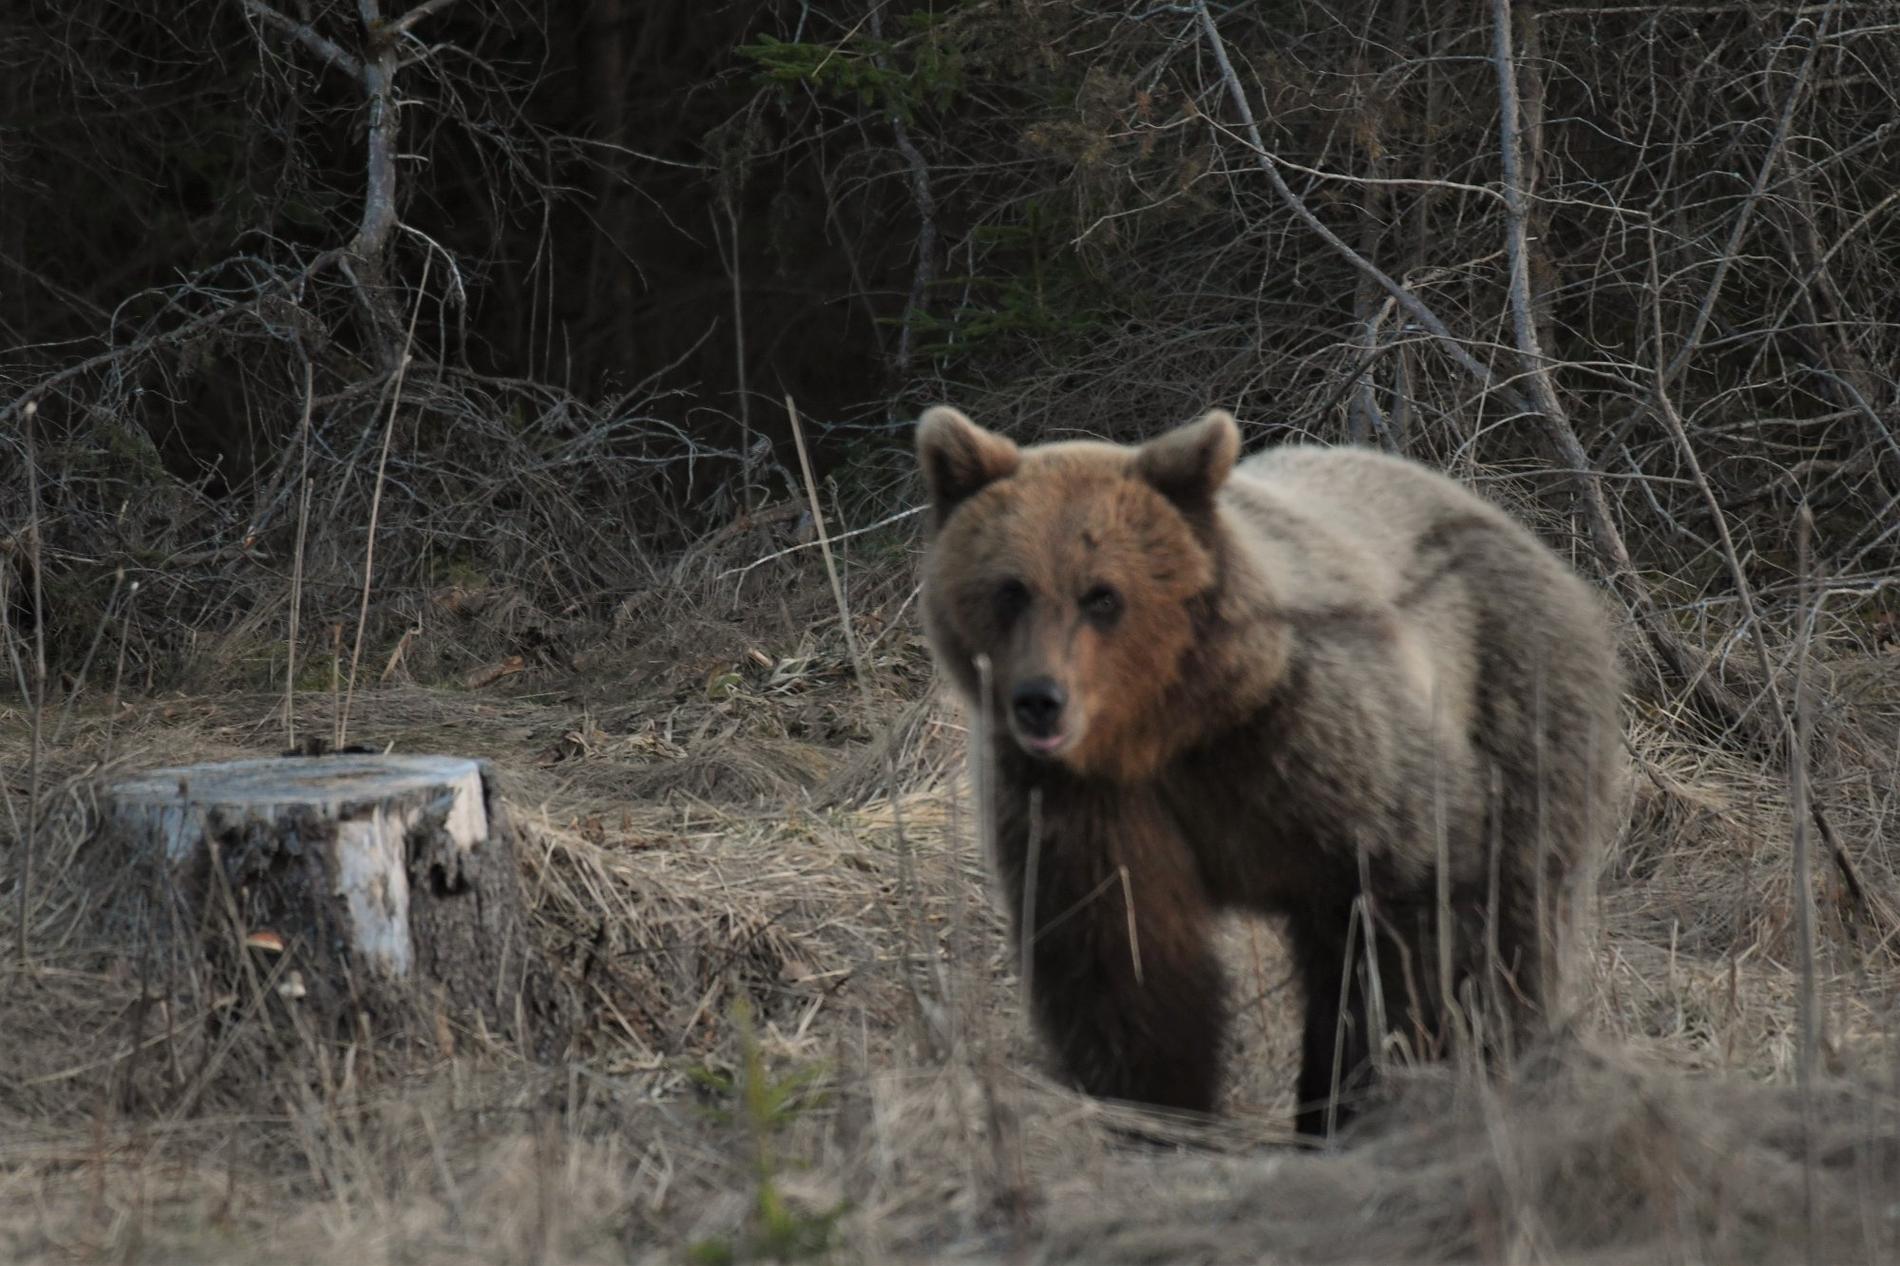 People had to be asked to stay away from the bear: – it could be a real nuisance